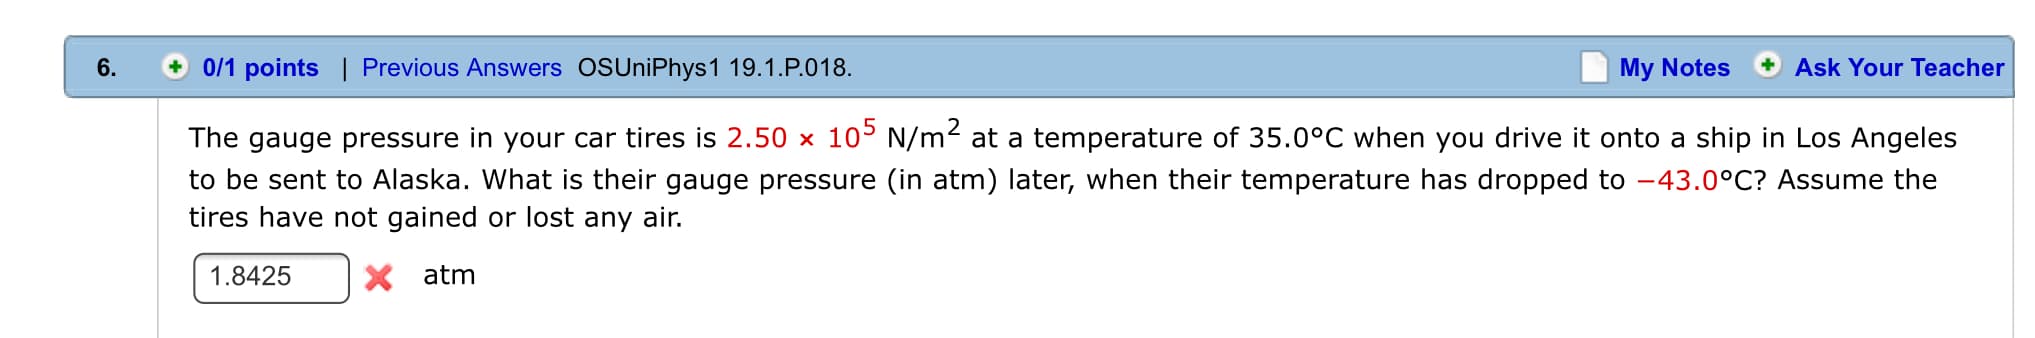 0/1 points | Previous Answers OSUniPhys1 19.1.P.018
6.
My Notes
Ask Your Teacher
10 N/m2 at a temperature of 35.0°C when you drive it onto a ship in Los Angeles
The gauge pressure in your car tires is 2.50
to be sent to Alaska. What is their gauge pressure (in atm) later, when their temperature has dropped to
tires have not gained or lost any air.
-43.0°C? Assume the
X atm
1.8425
